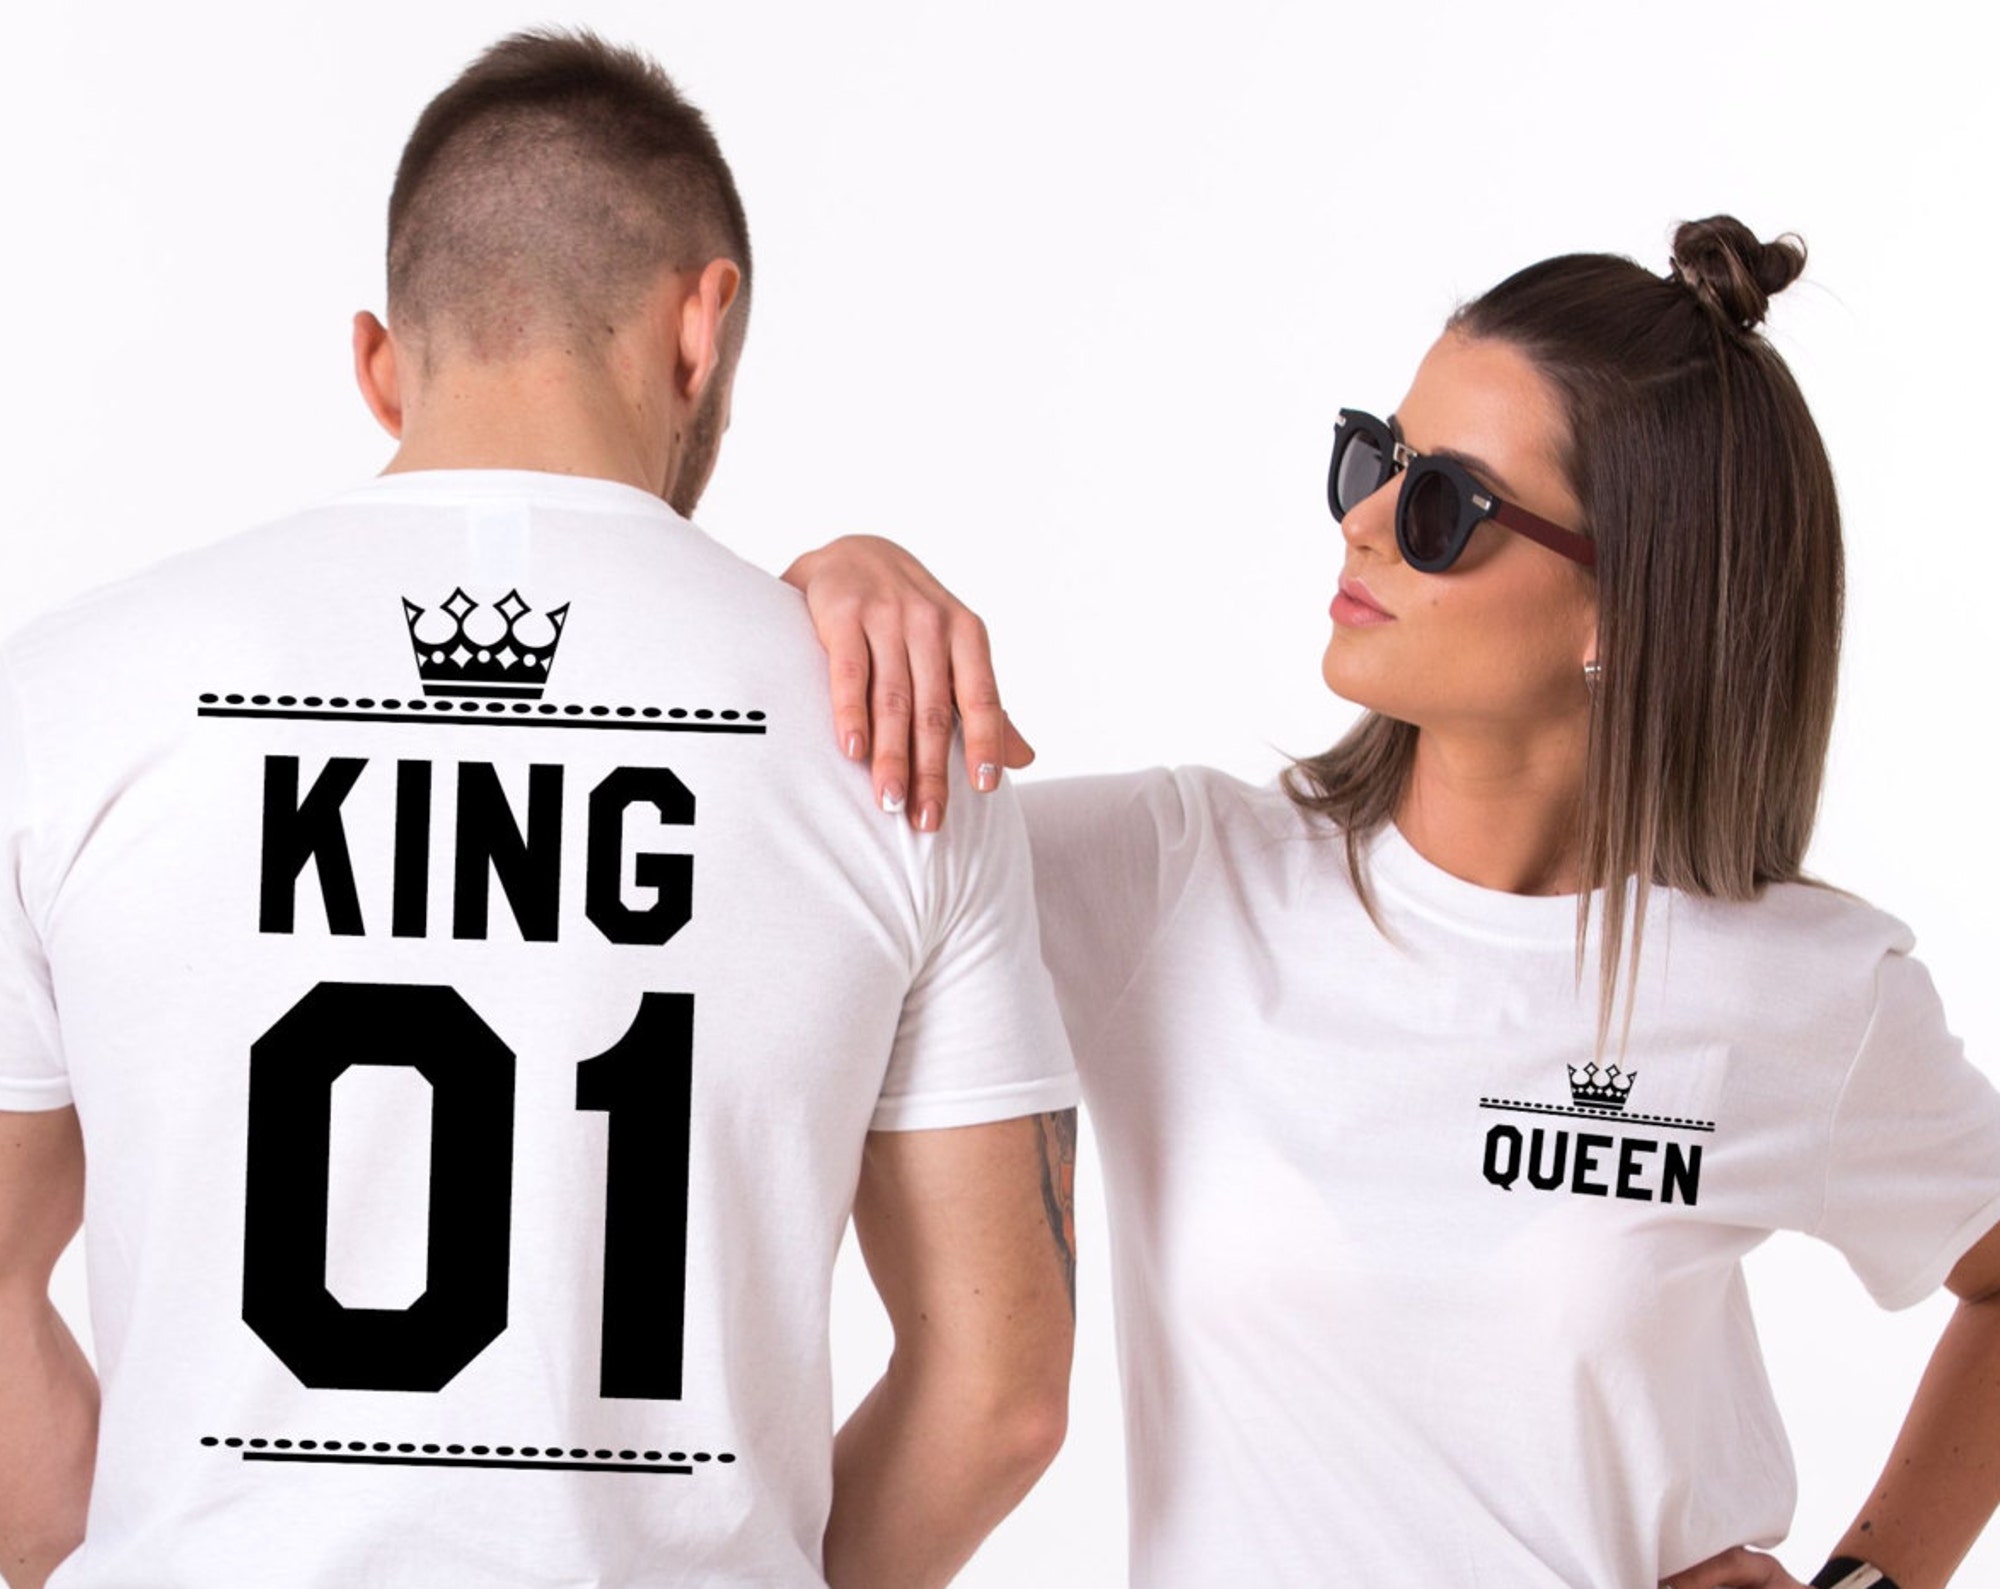 Discover Couple shirts, Matching Couples Shirts, Matching Couples King Queen, King Shirts